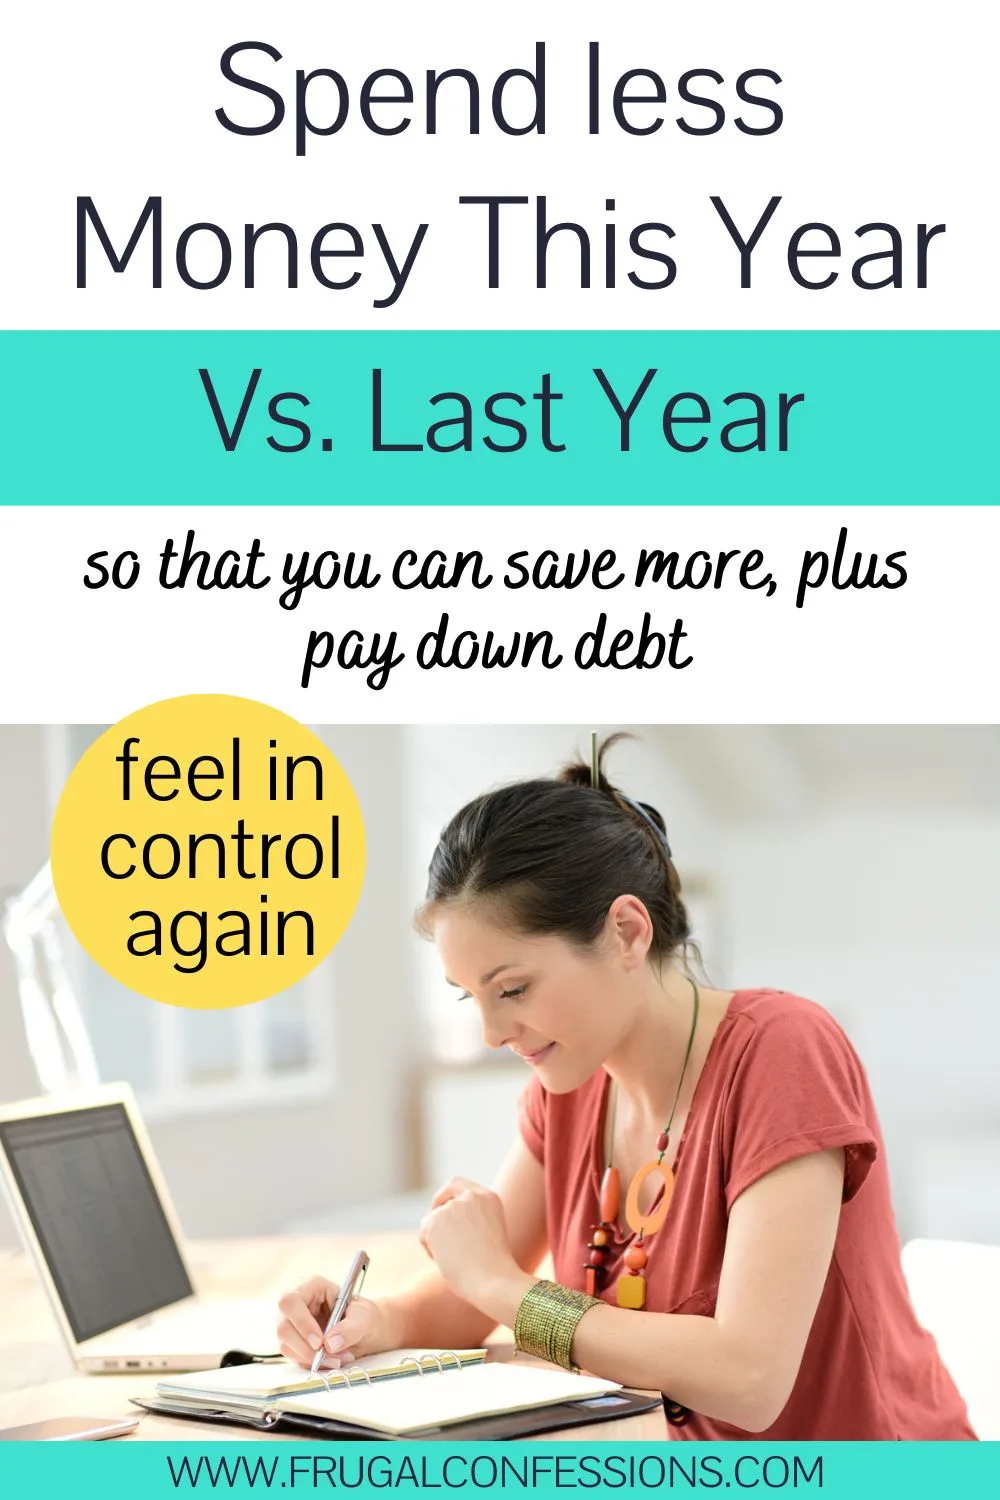 woman in orange shirt at home desk working, text overlay "spend less money this year vs last year"